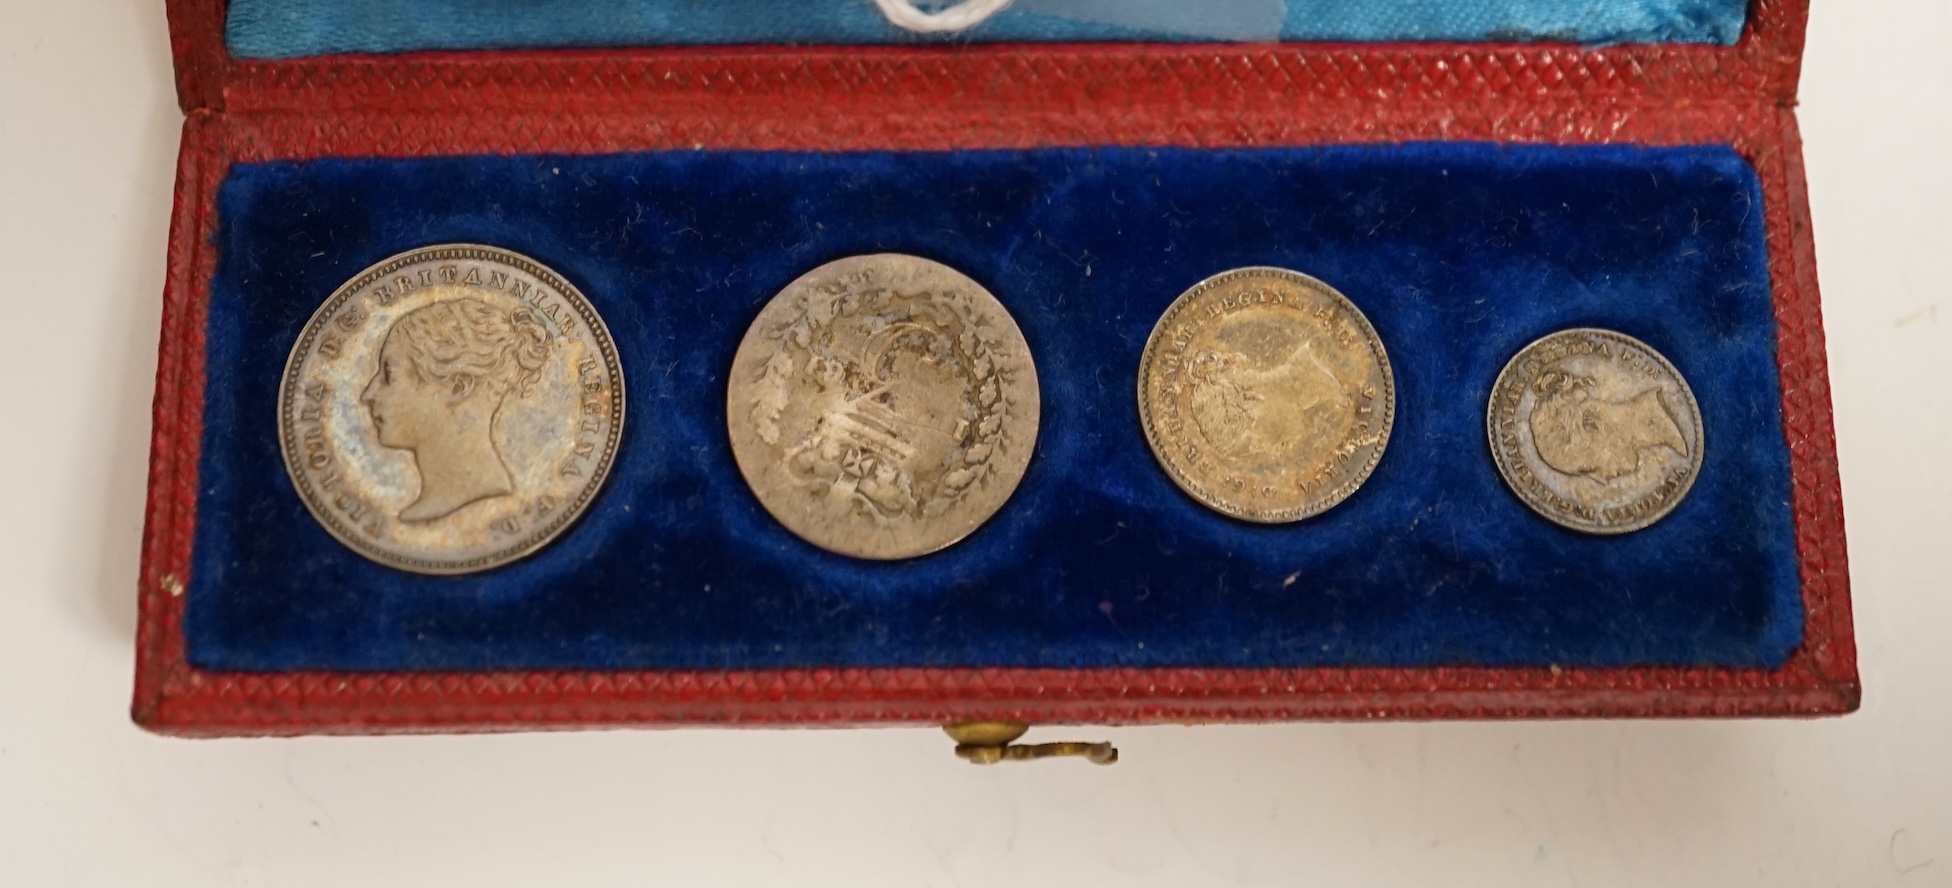 British silver coins, Victoria, A cased set of maundy money, 1879